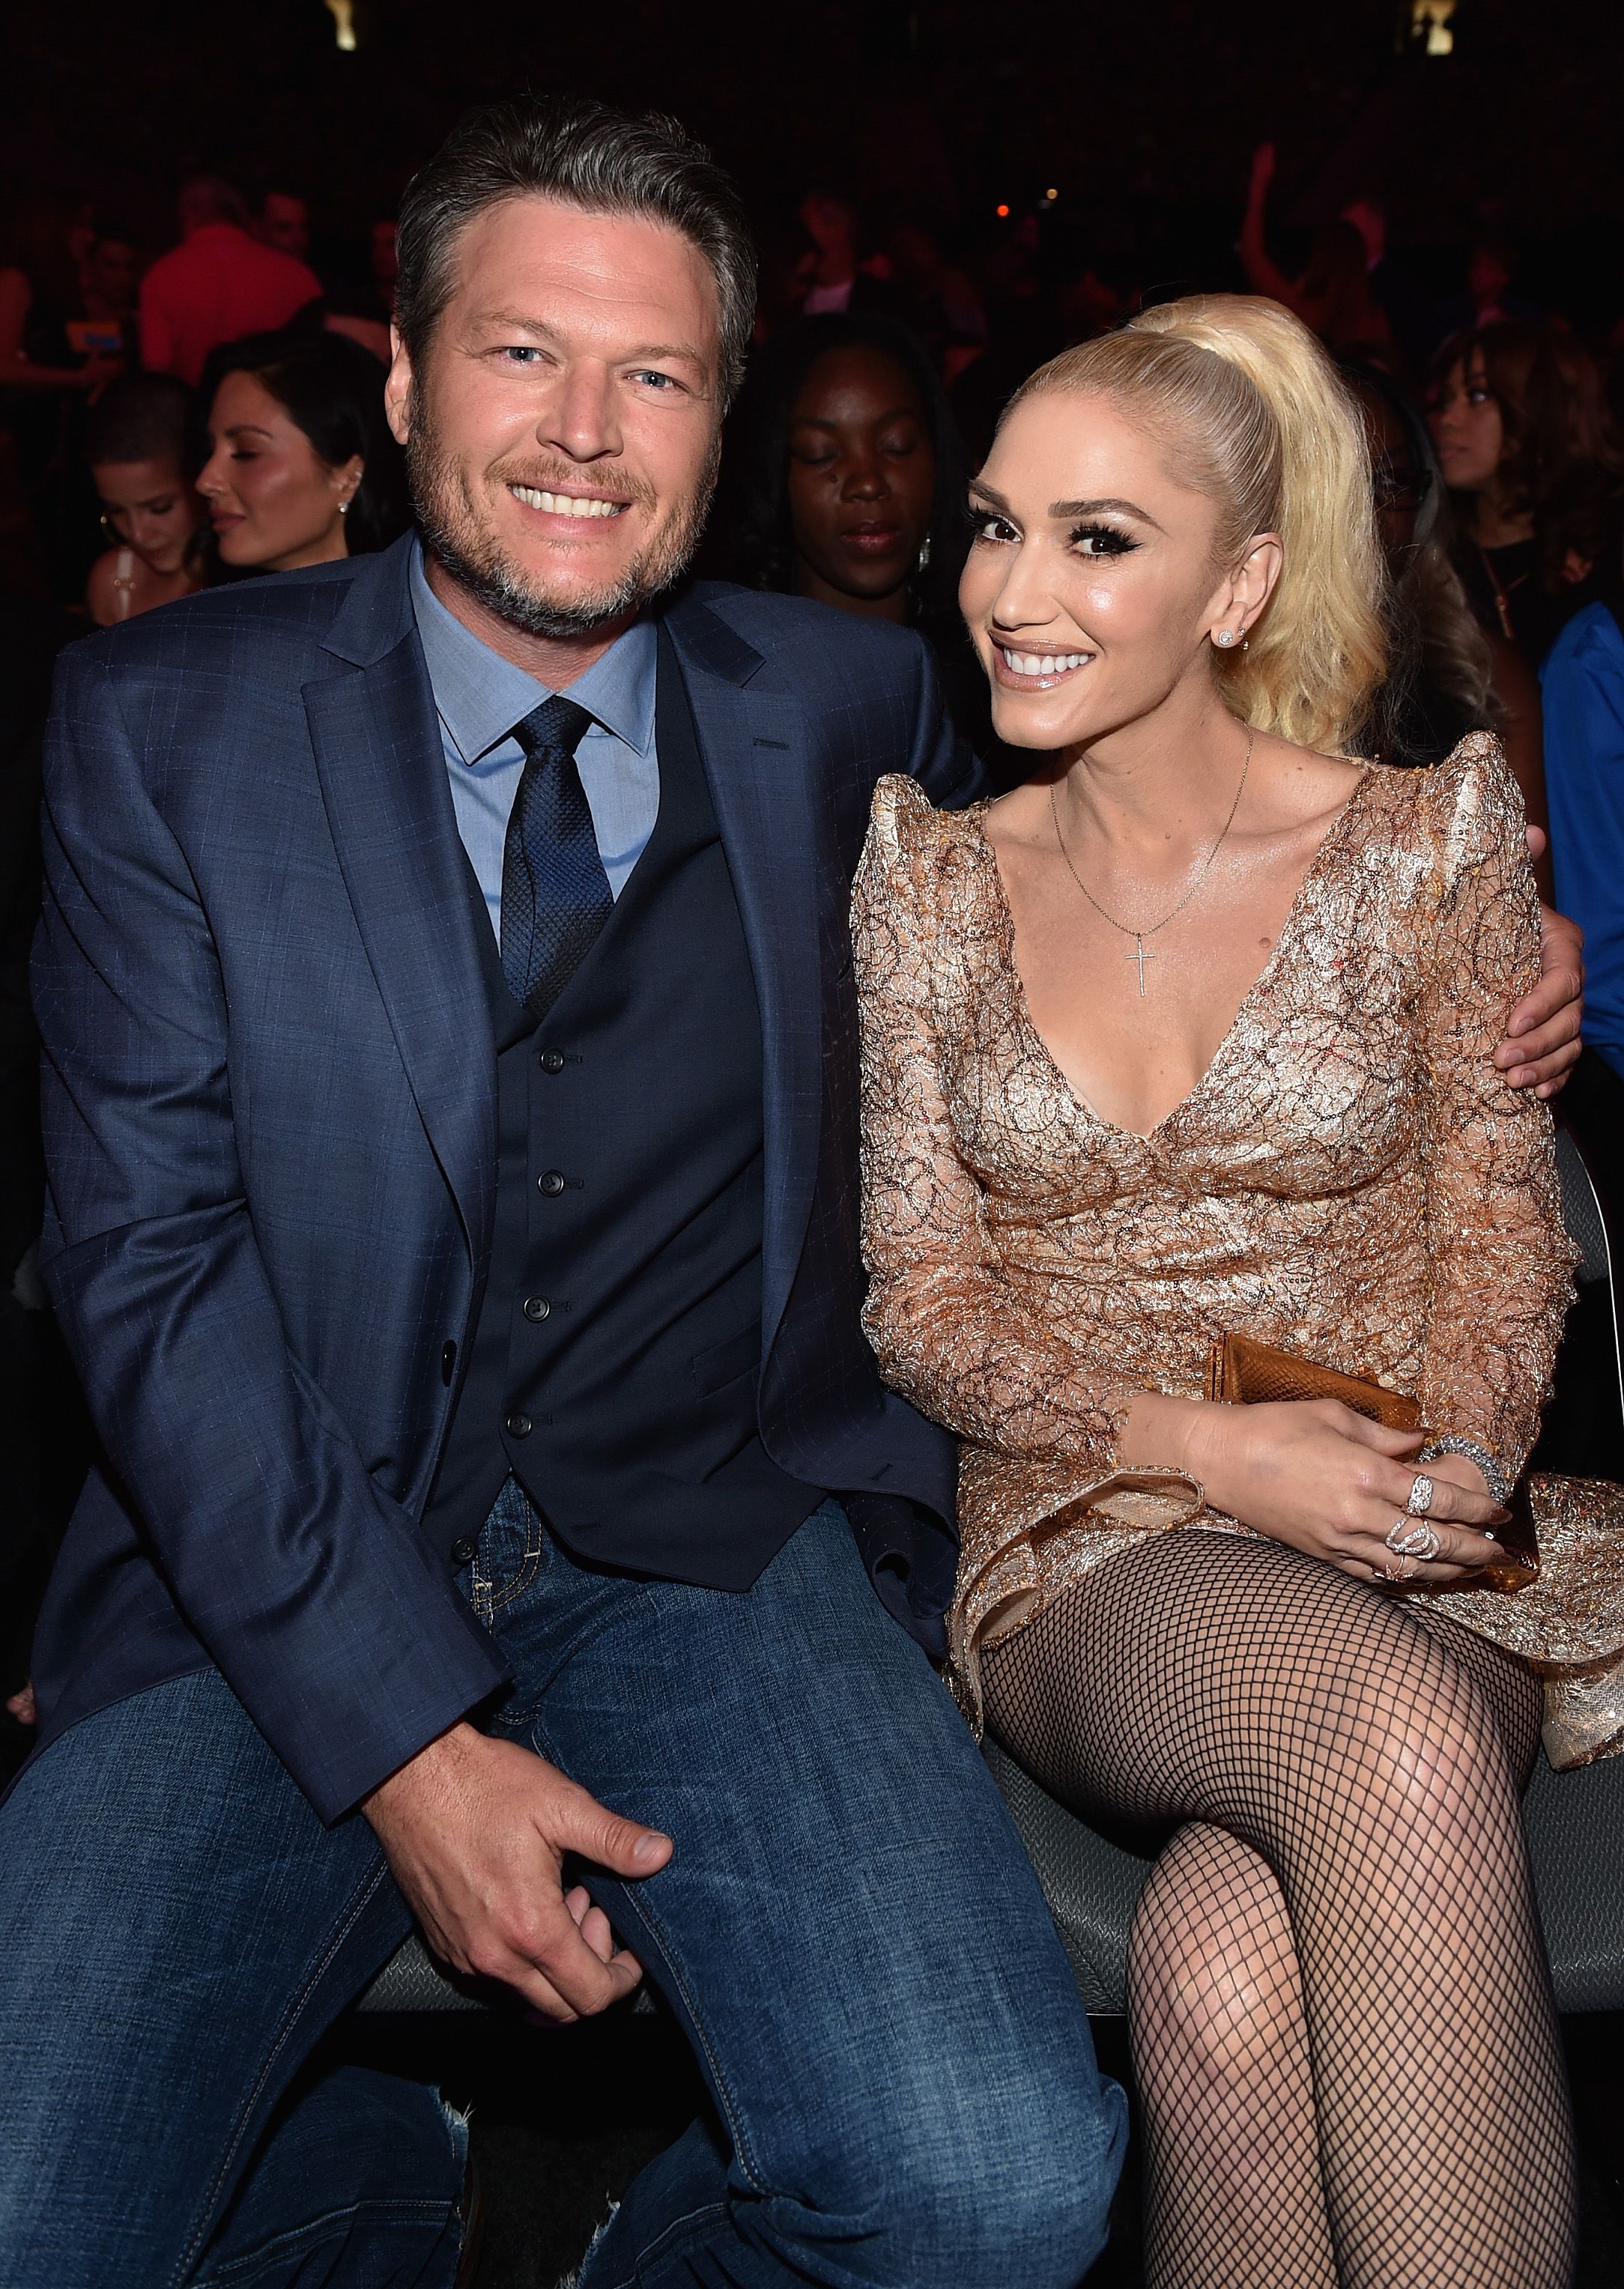 Blake Shelton and Gwen Stefani at the 2017 Billboard Music Awards at T-Mobile Arena on May 21, 2017 | Photo: Getty Images